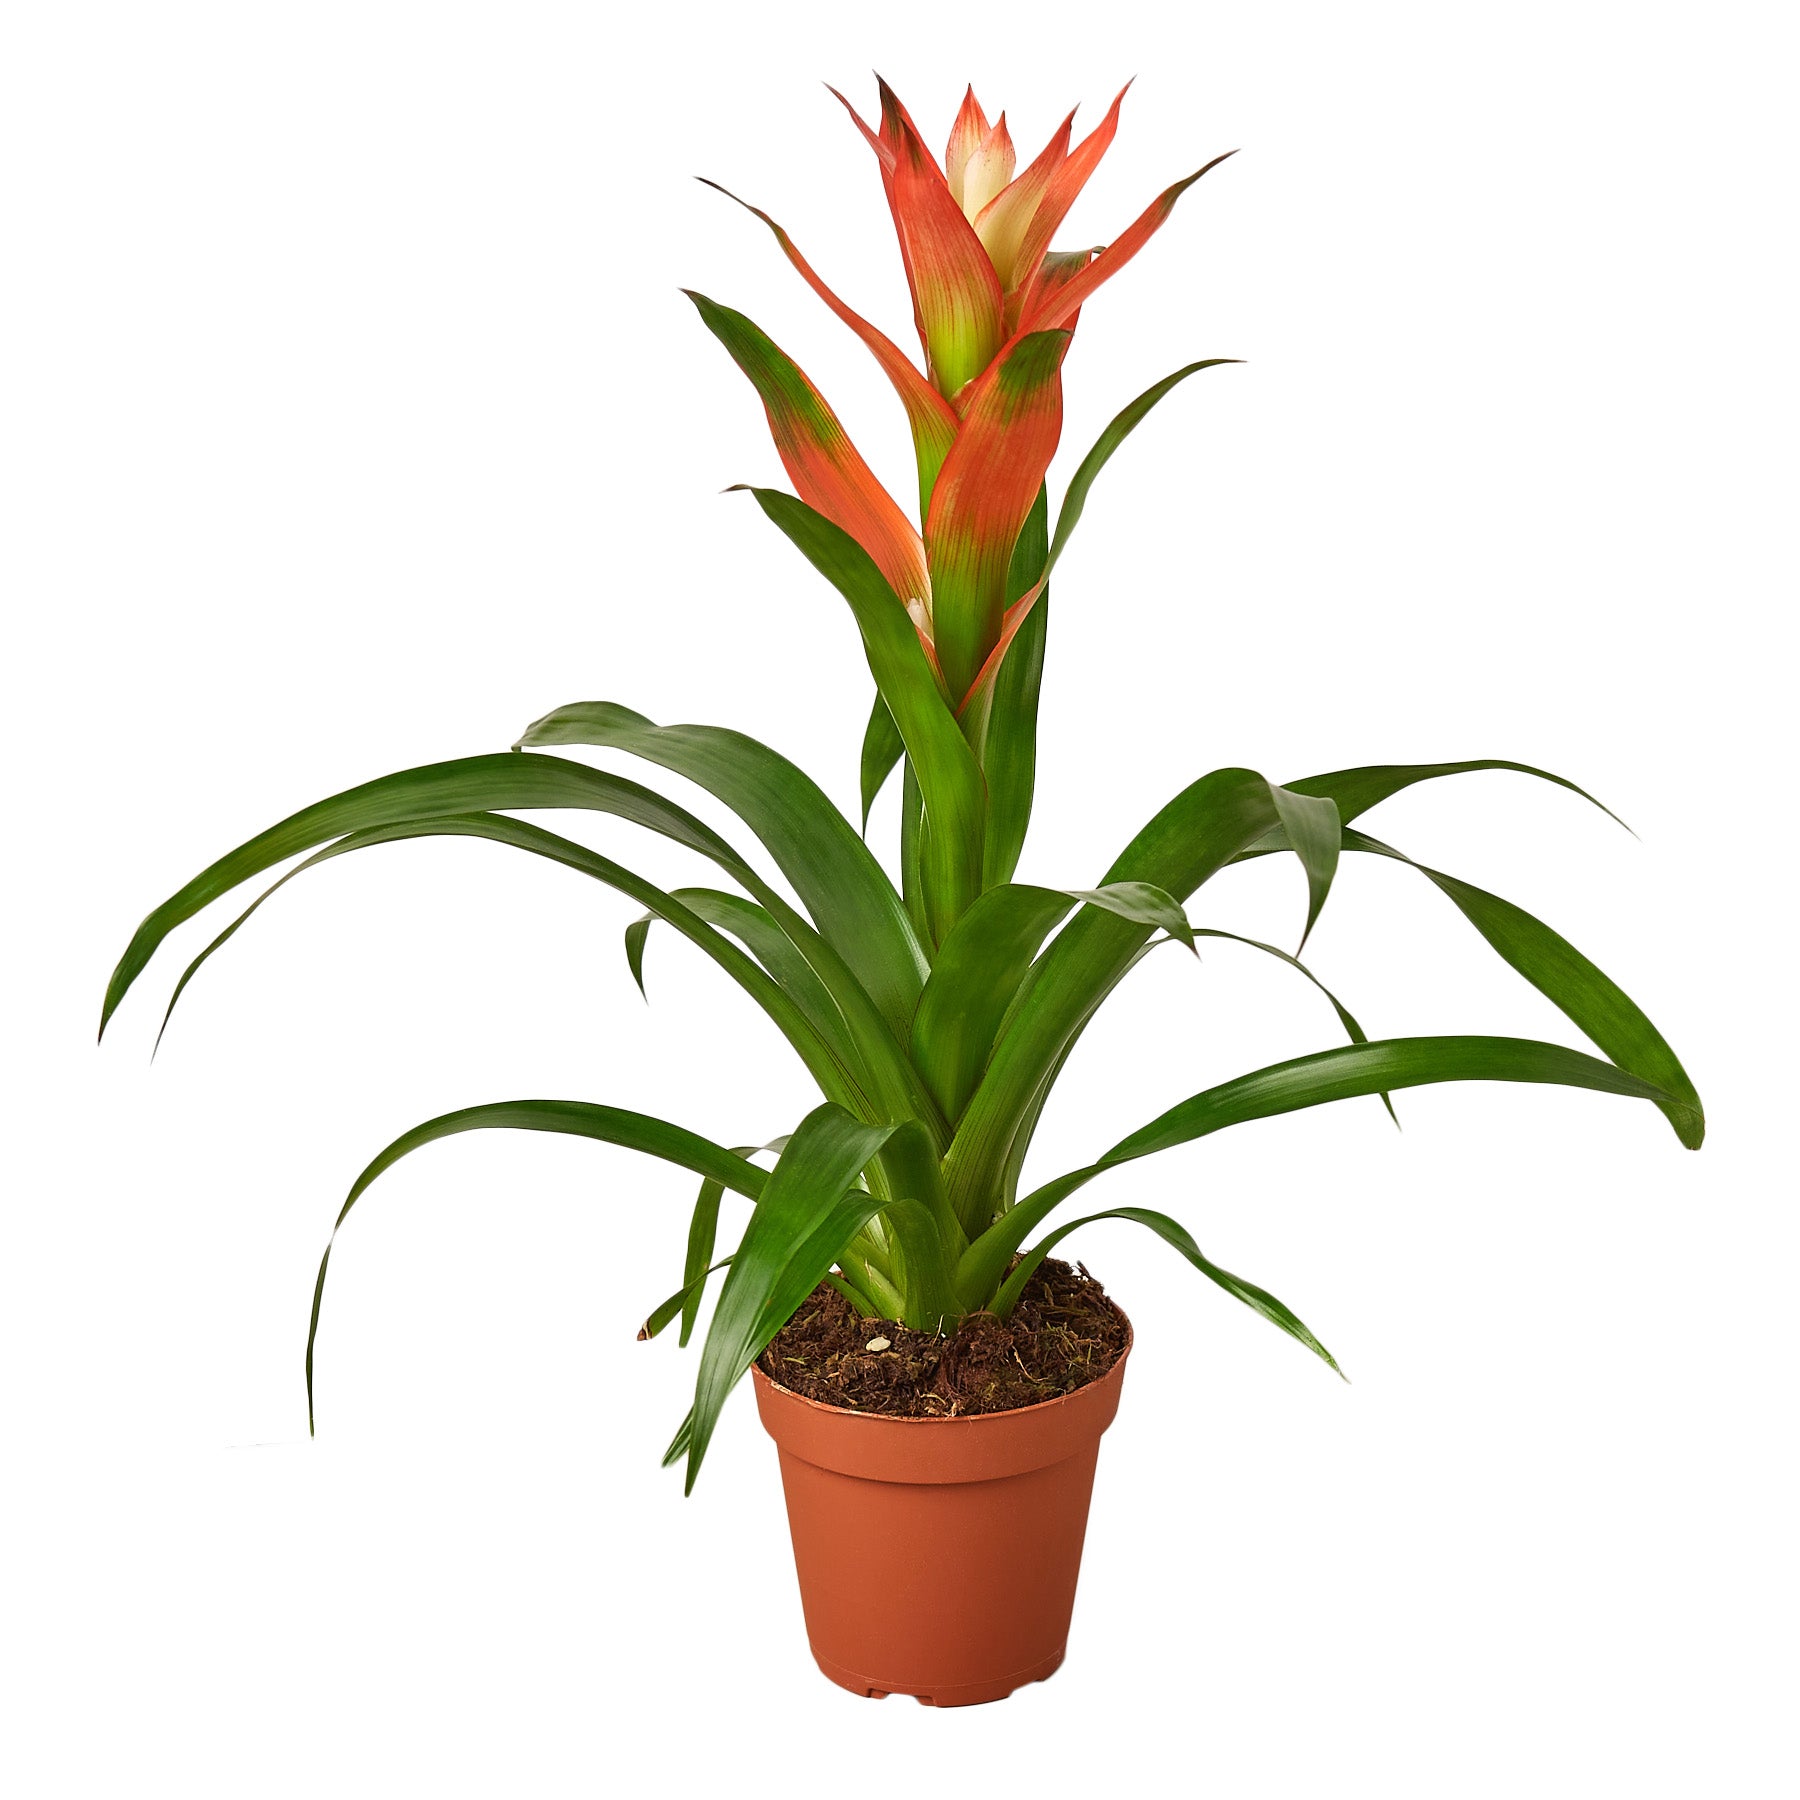 A tropical plant in a pot on a white background from the best garden nursery near me.